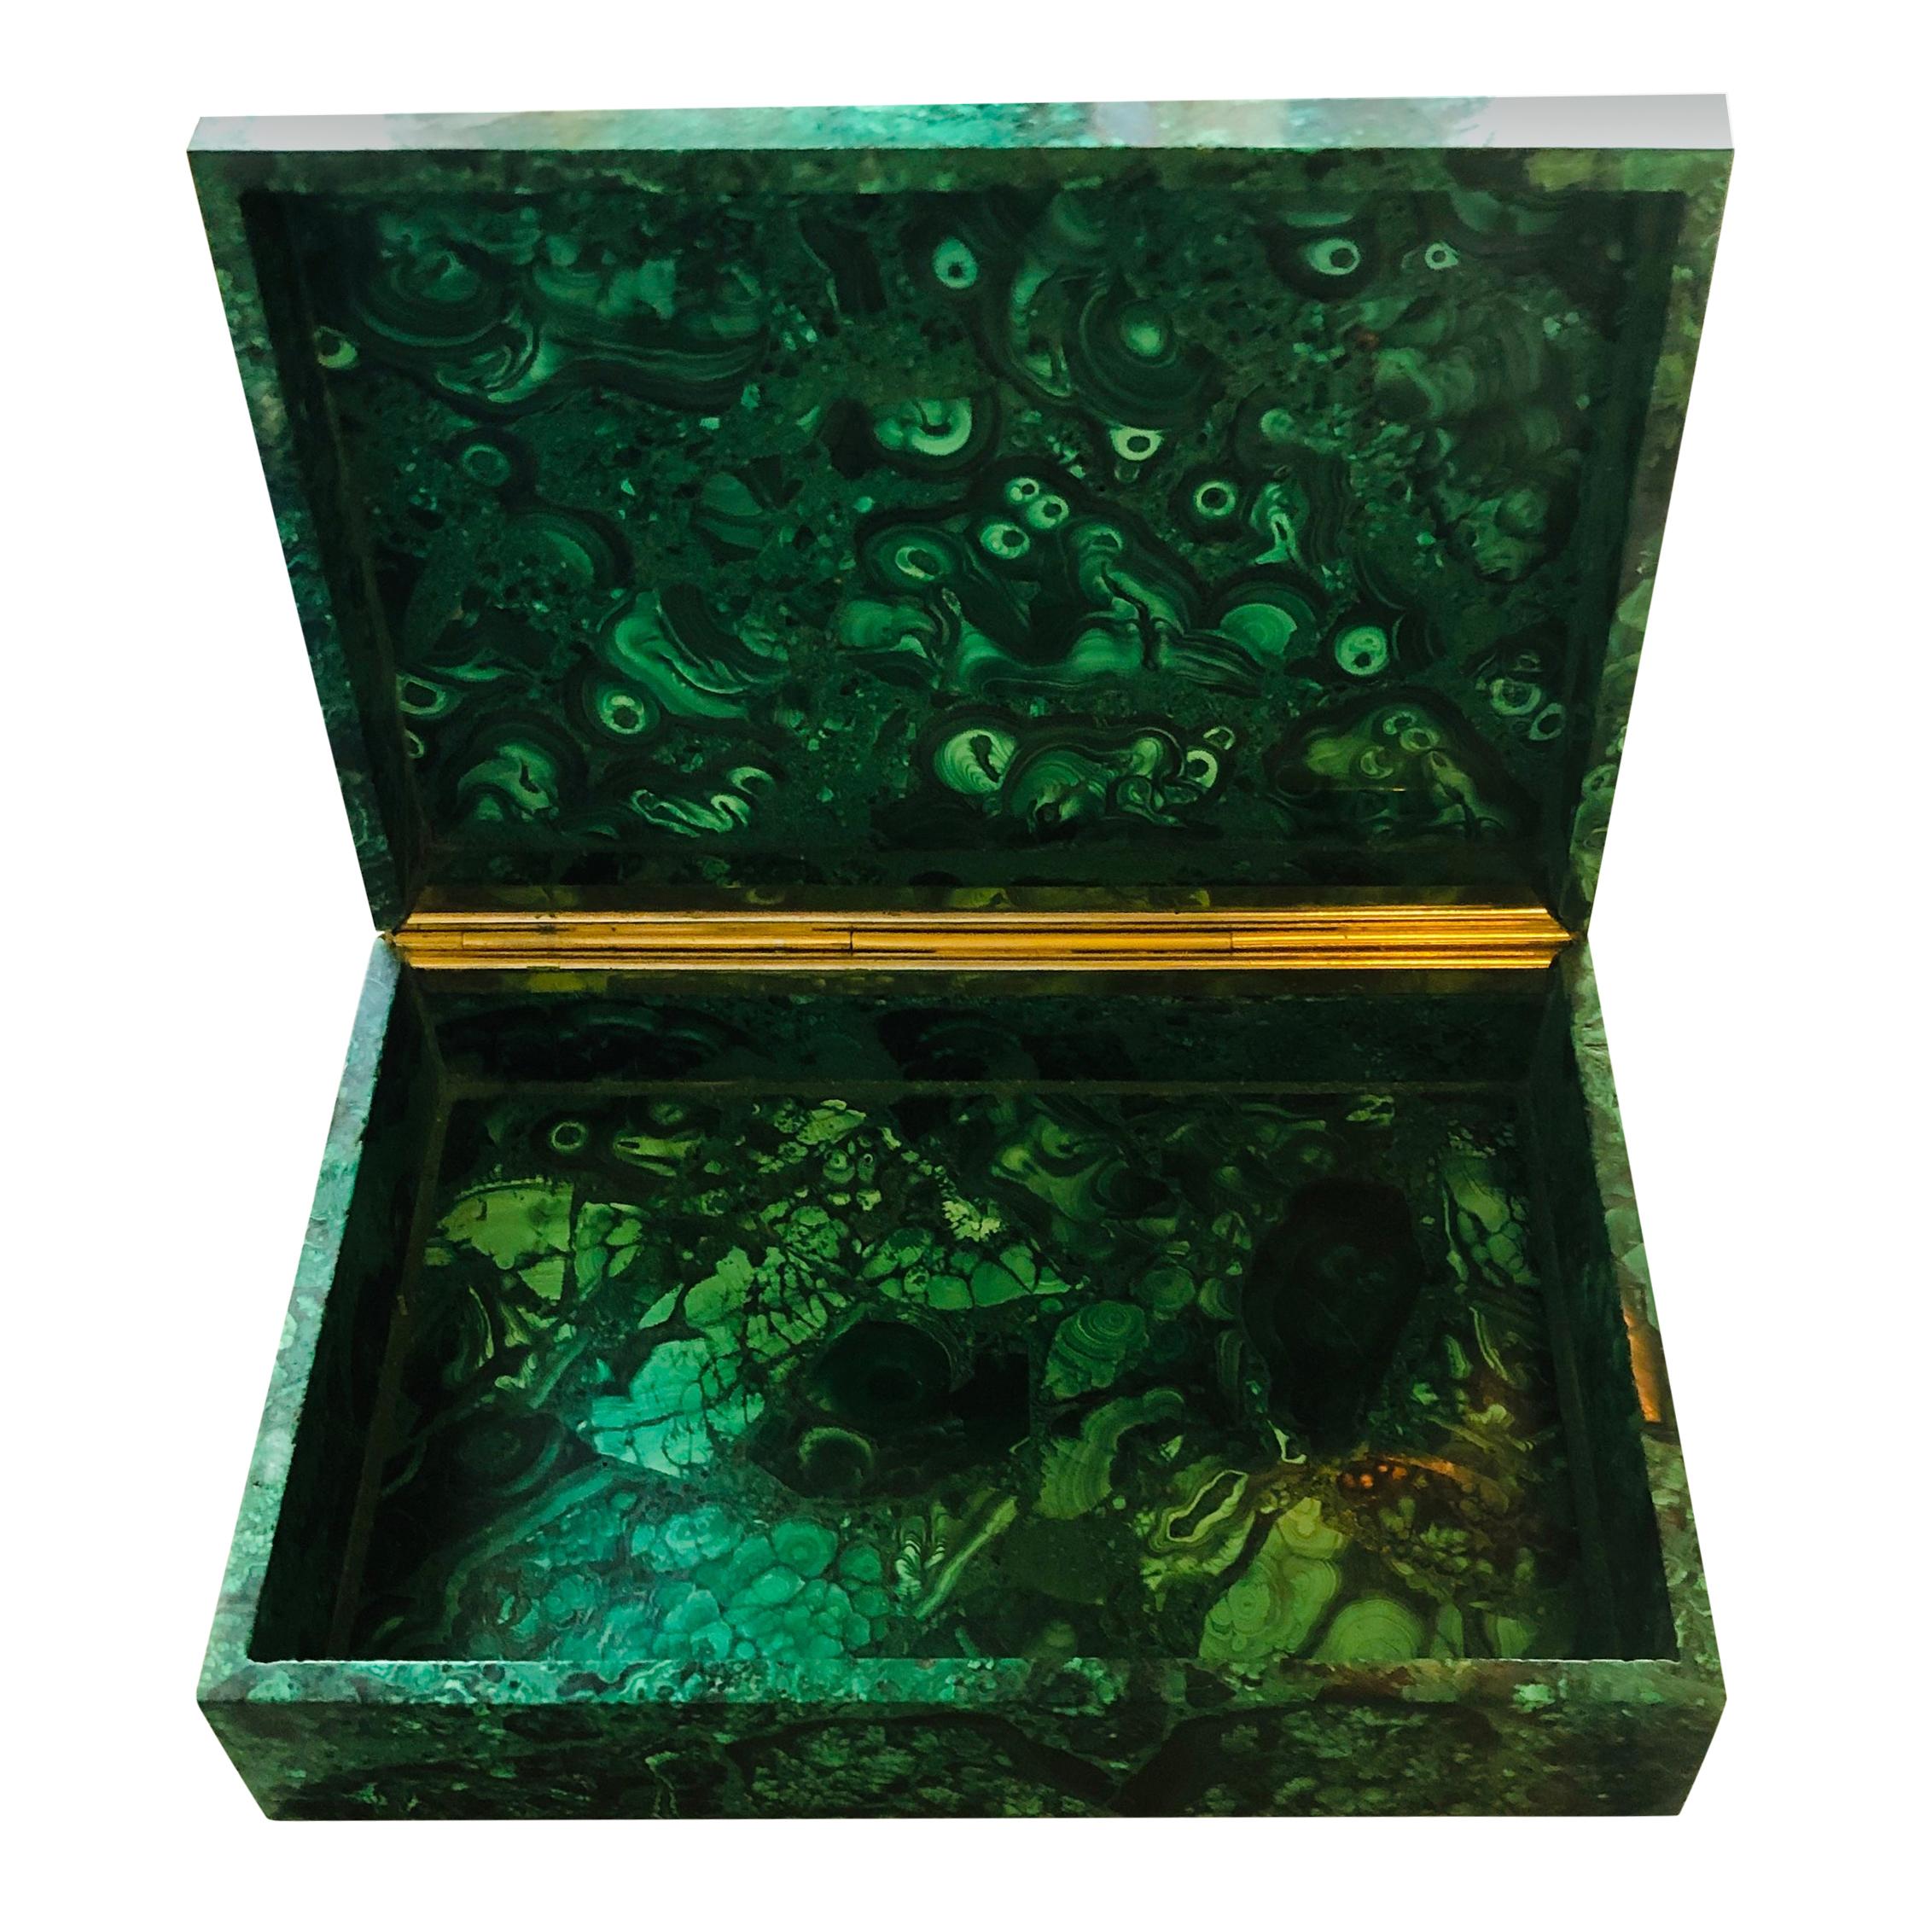 A mid-20th century polished malachite box with natural swirls and having an Ormolu hinge.